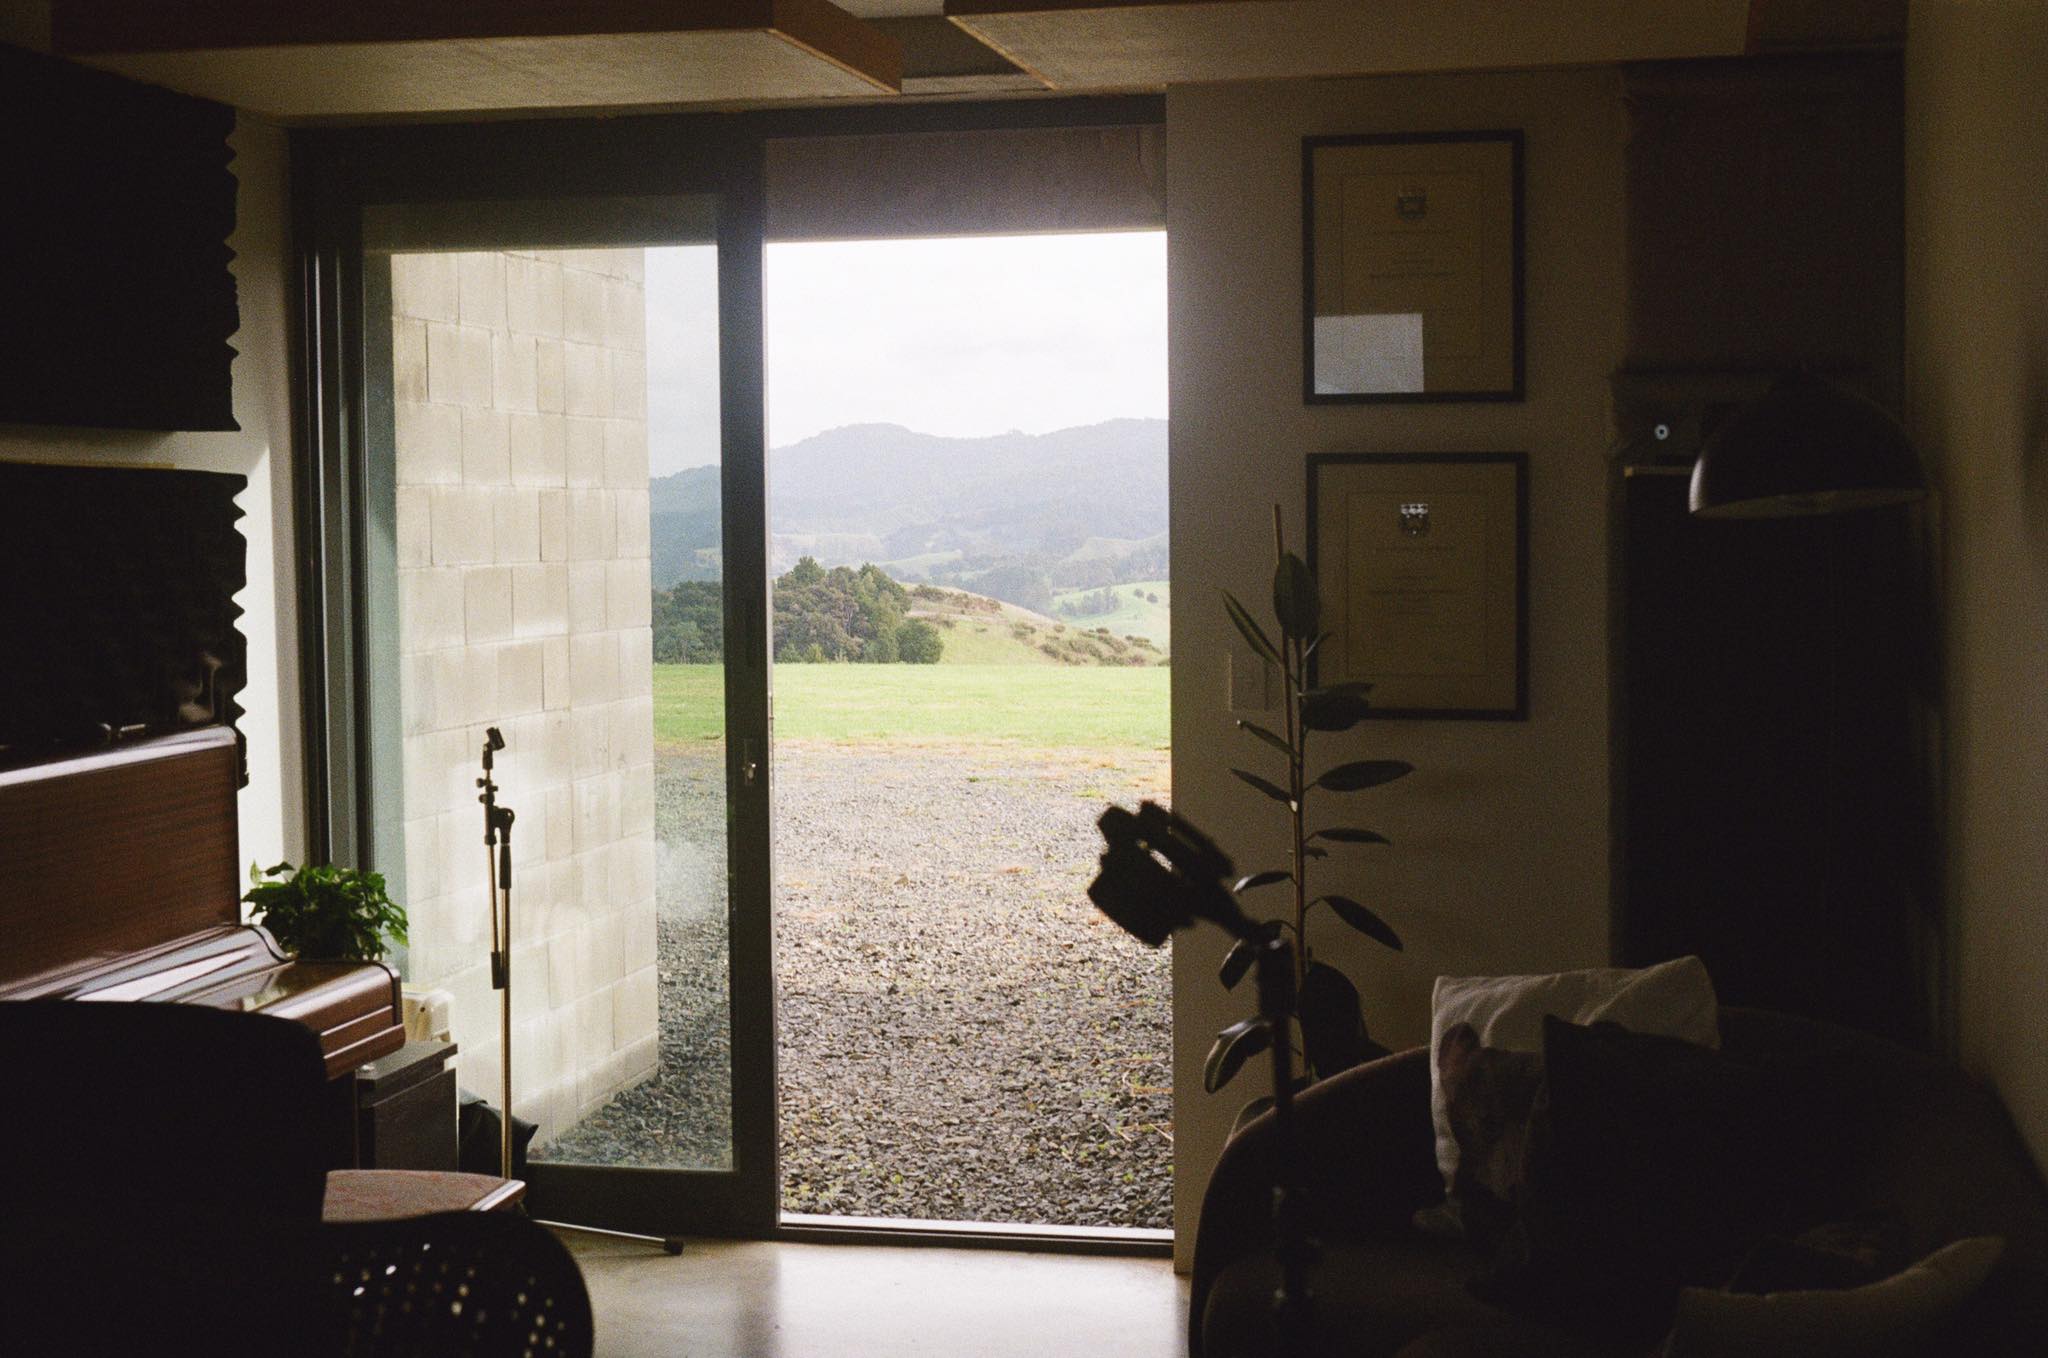 recording studio interior with view outside to a valley